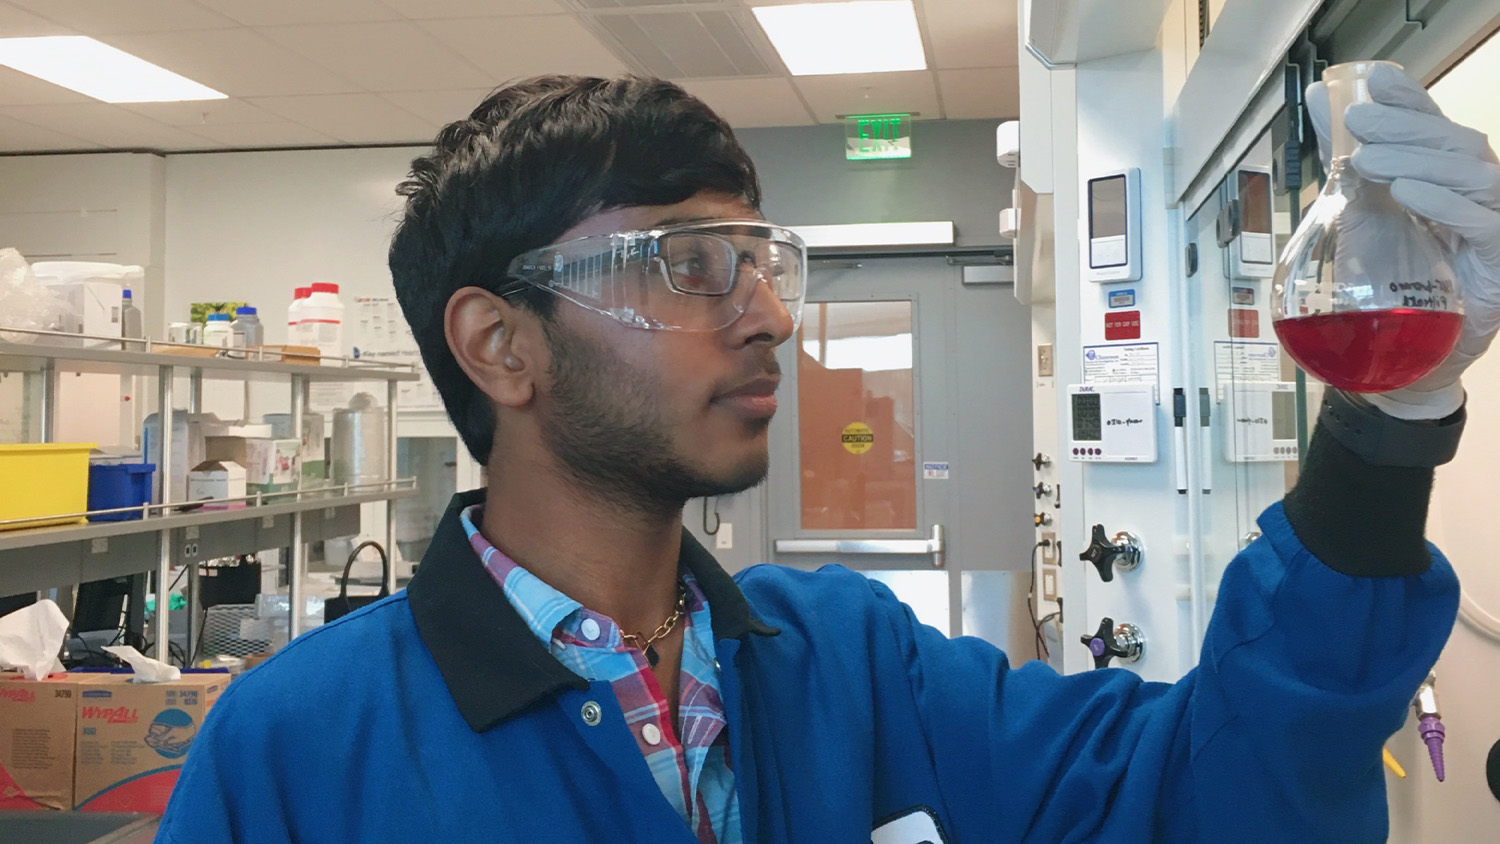 Kiran Soma holds up a beaker filled with red liquid inside a laboratory